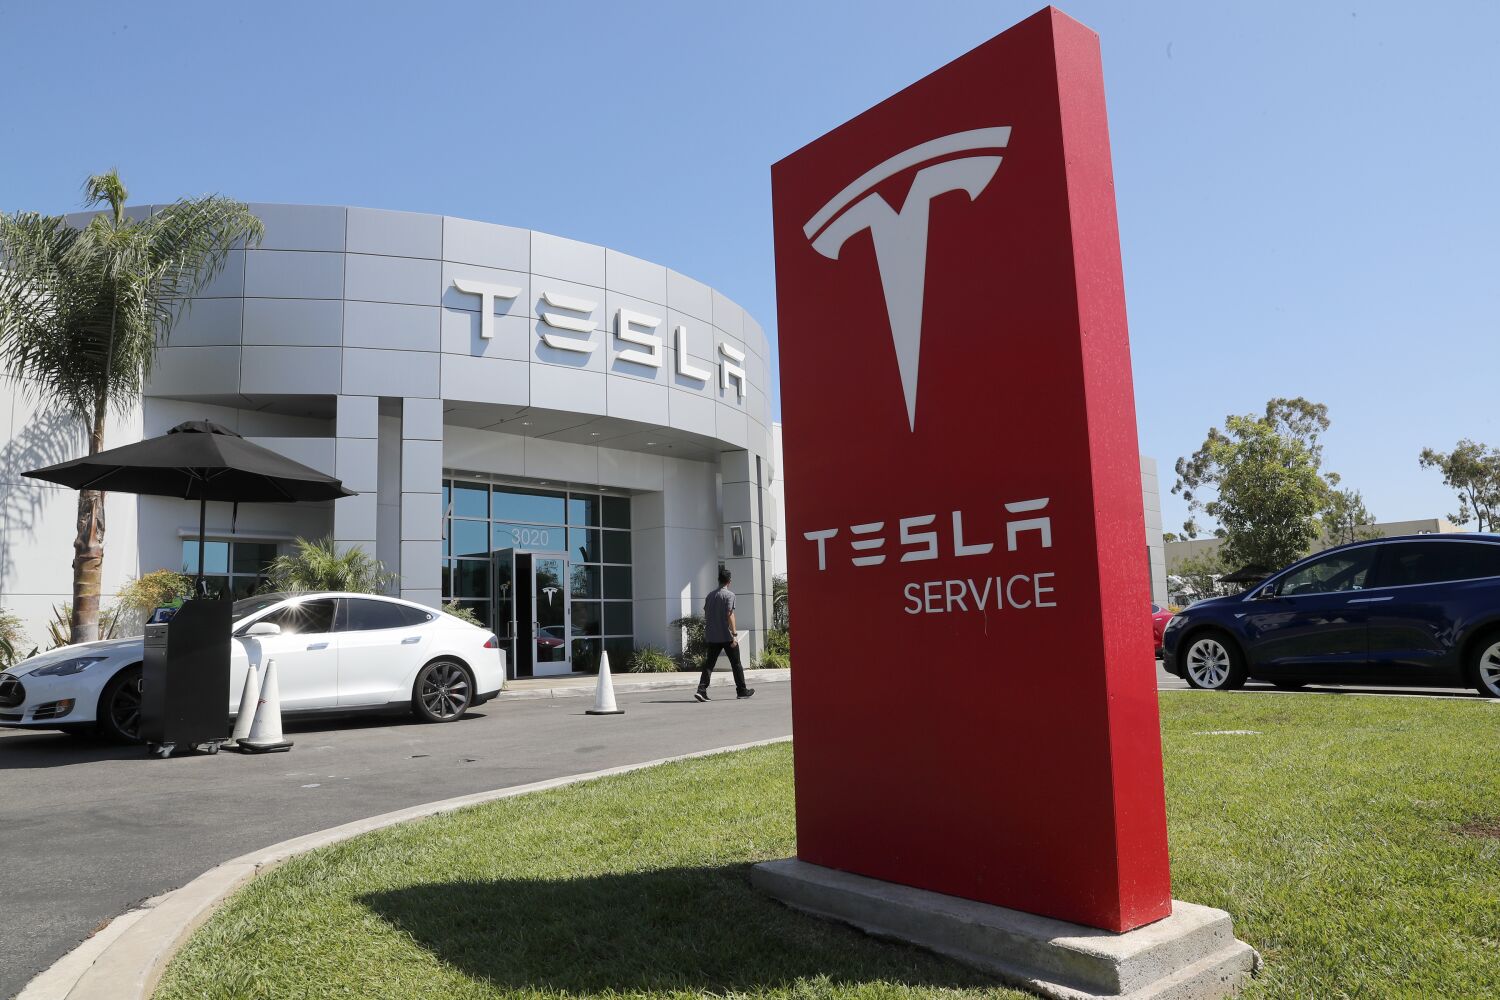 Secret Tesla team reportedly thwarted range complaints by mass-canceling service appointments